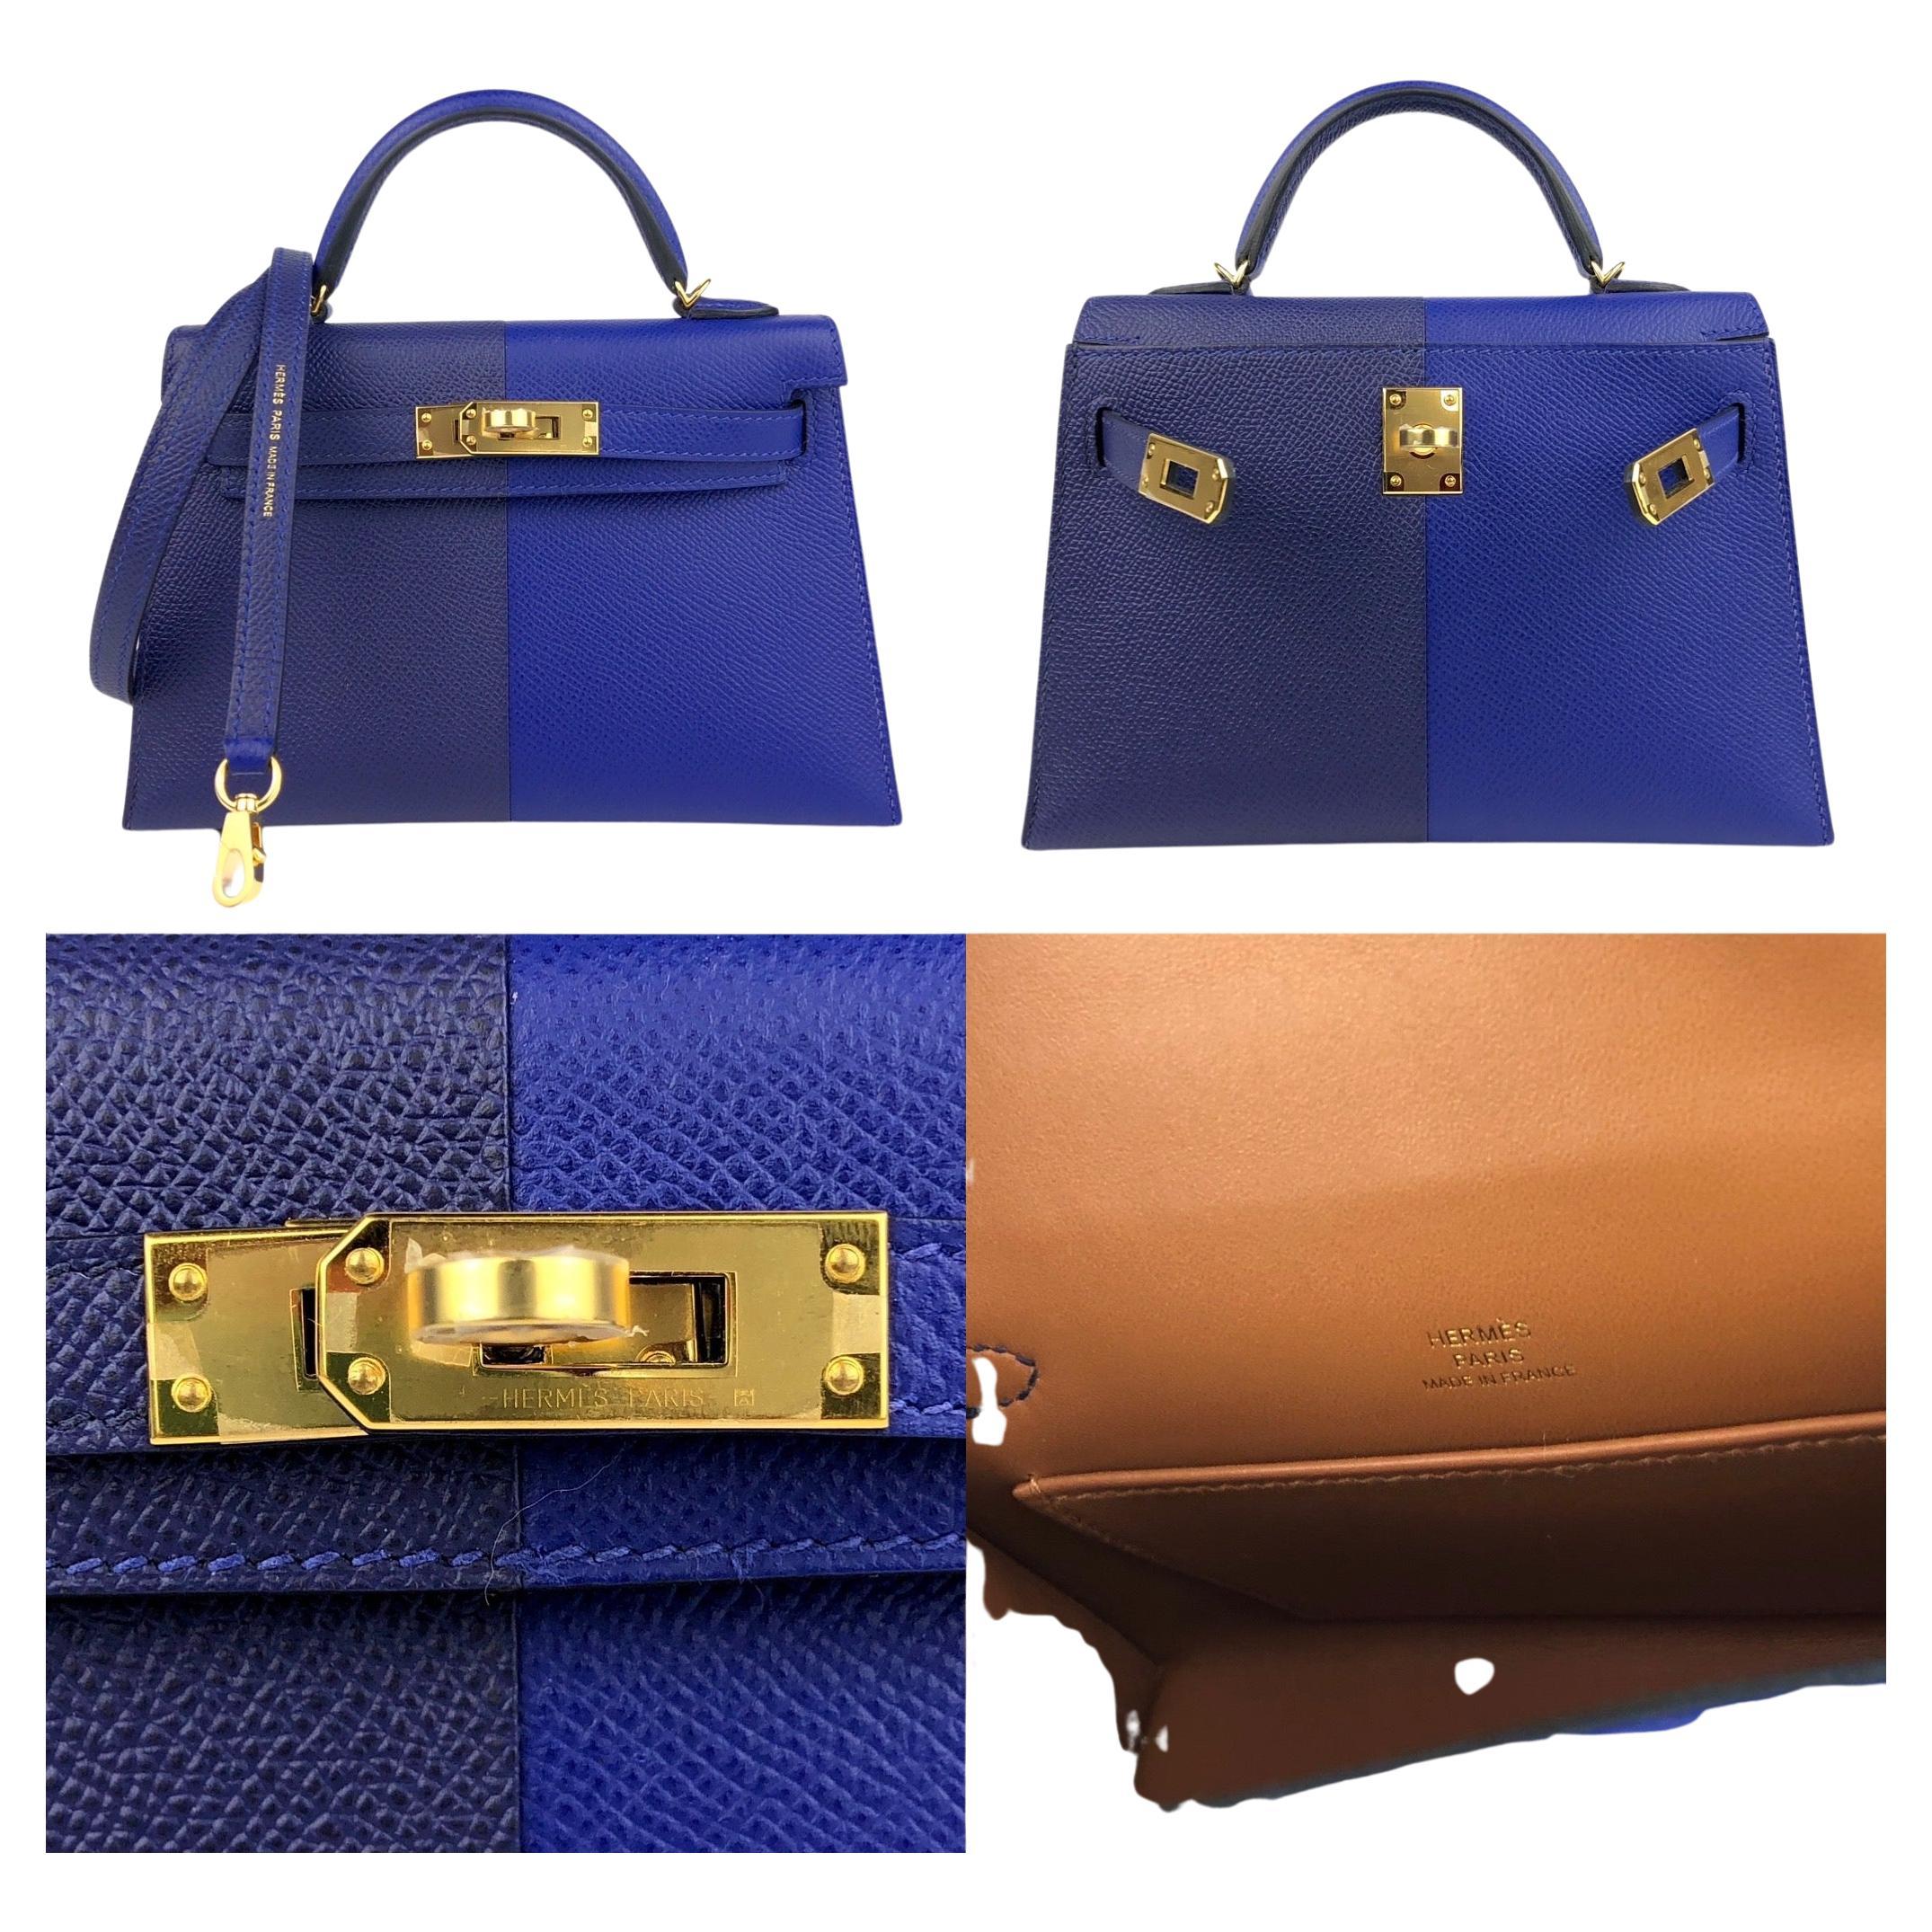 Only One For Sale on the Market!
U Stamp 2022 Full Set With LIMITED EDITION BOX & DUST BAGS. ULTRA RARE Tri Color Hermes Kelly 20 Mini Blue Electric, Blue Encre and Gold Interior Epsom Leather Complimented by Gold Hardware.  

Shop with Confidence